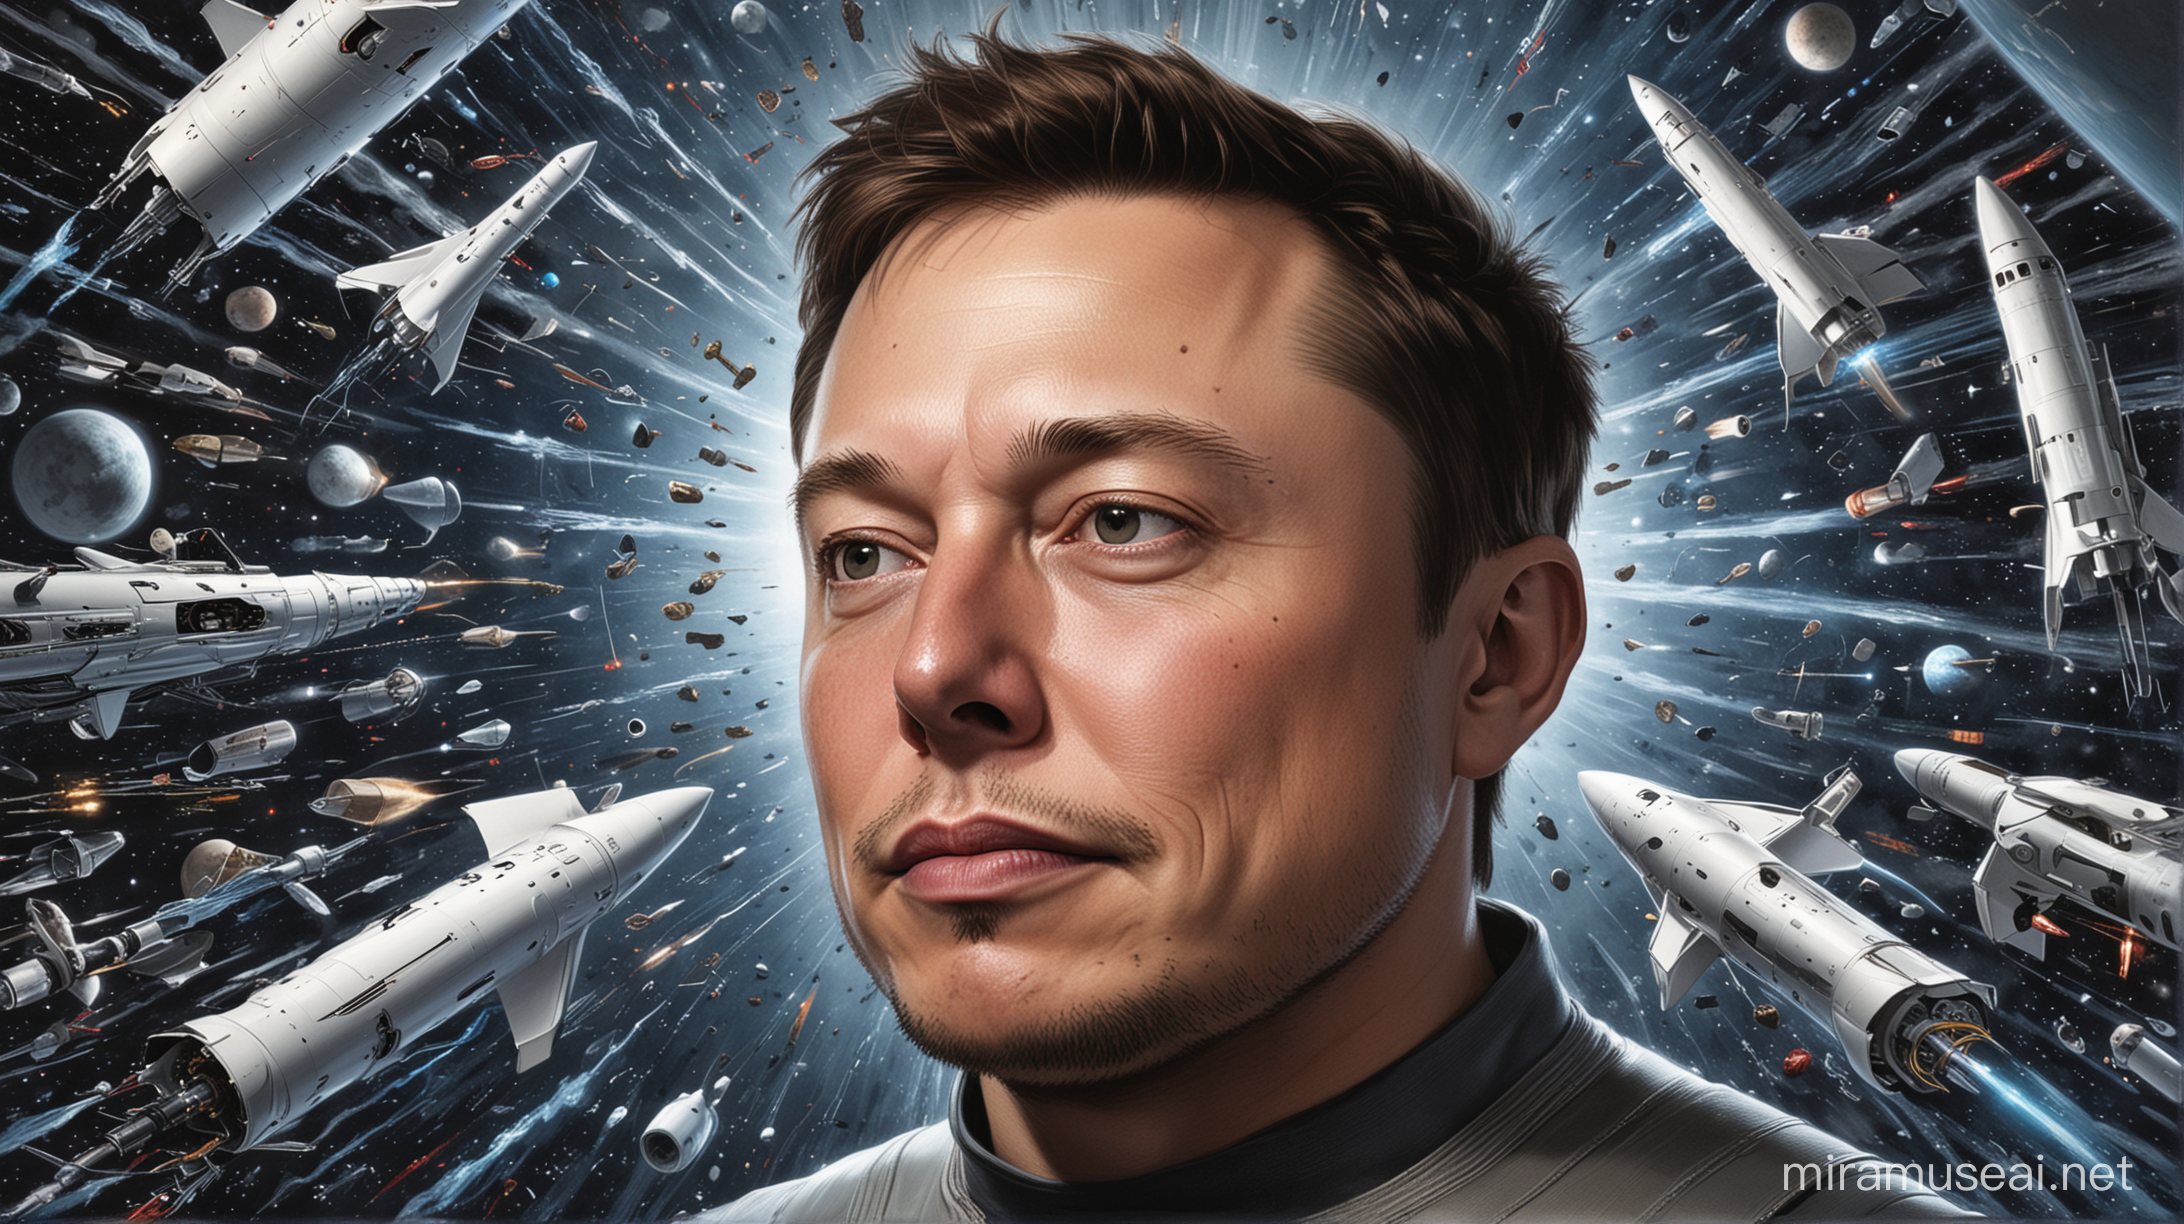 Visionary Genius Elon Musk Contemplates SpaceX Rockets and Neuralink Chips